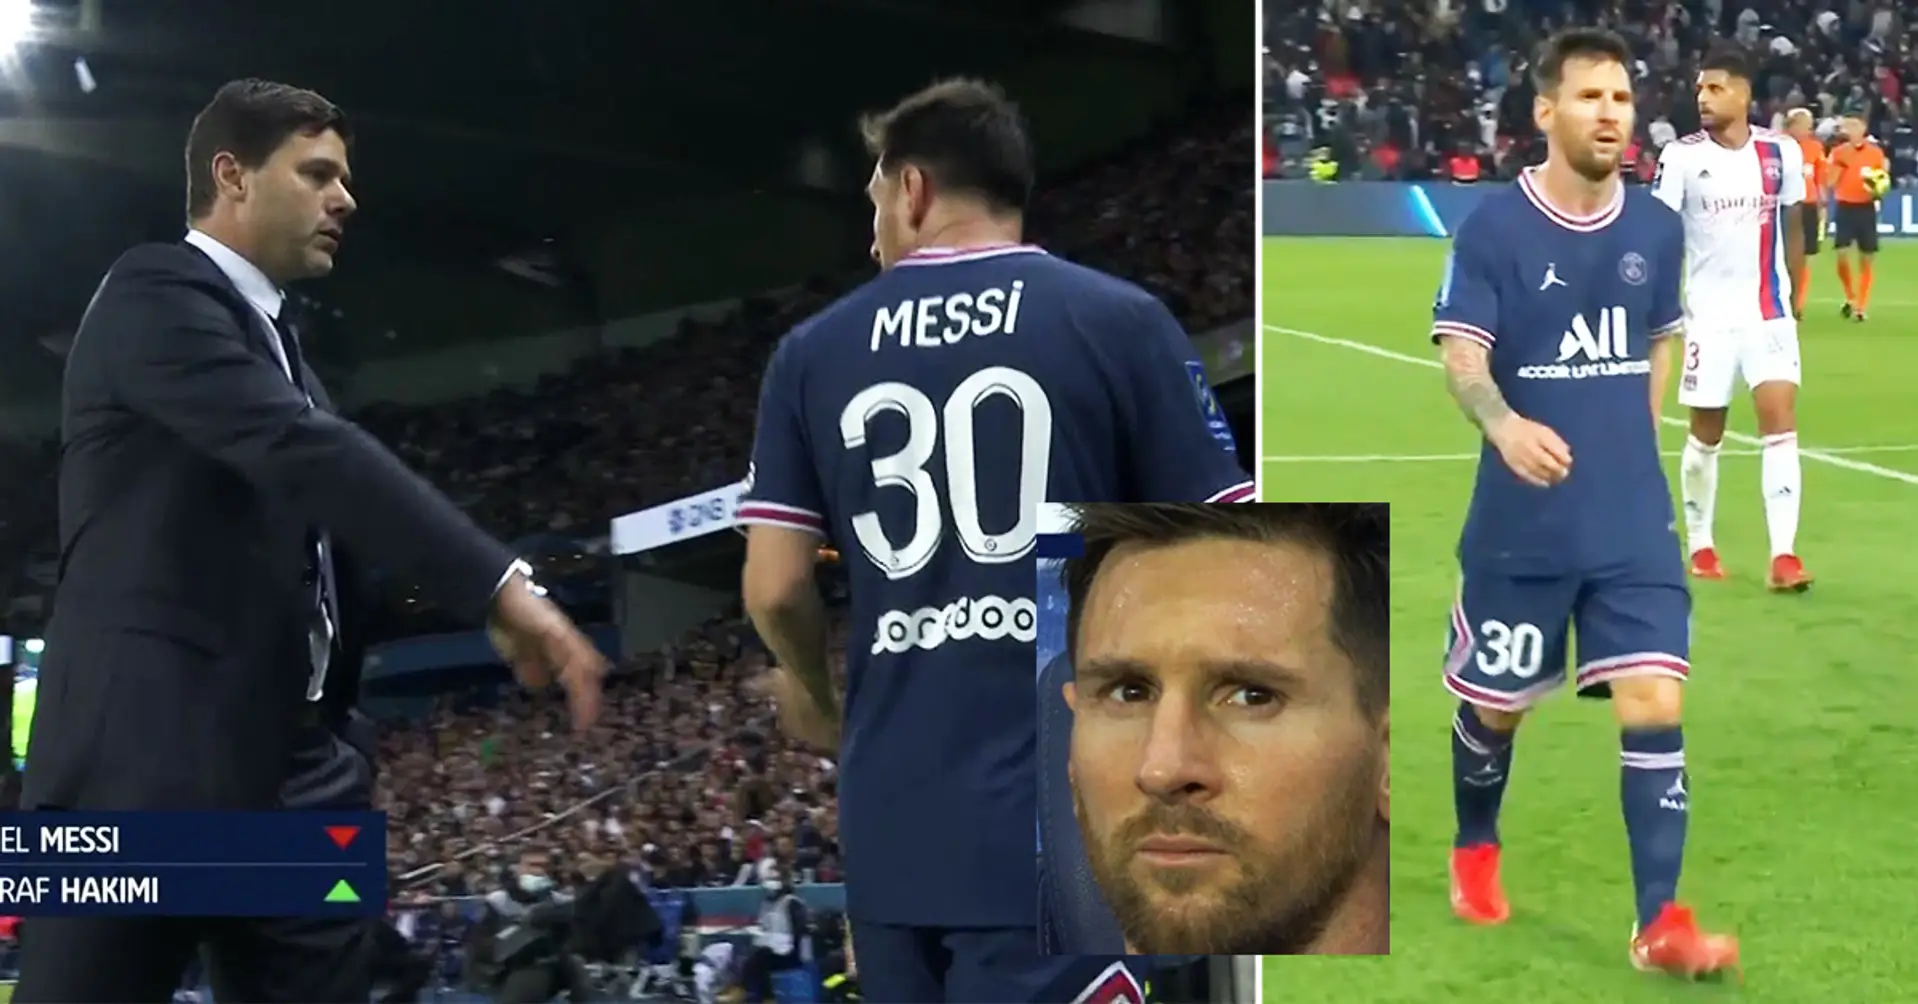 Scandal: Leo Messi refuses to shake Pochettino's hand after he subs him, reaction caught on camera